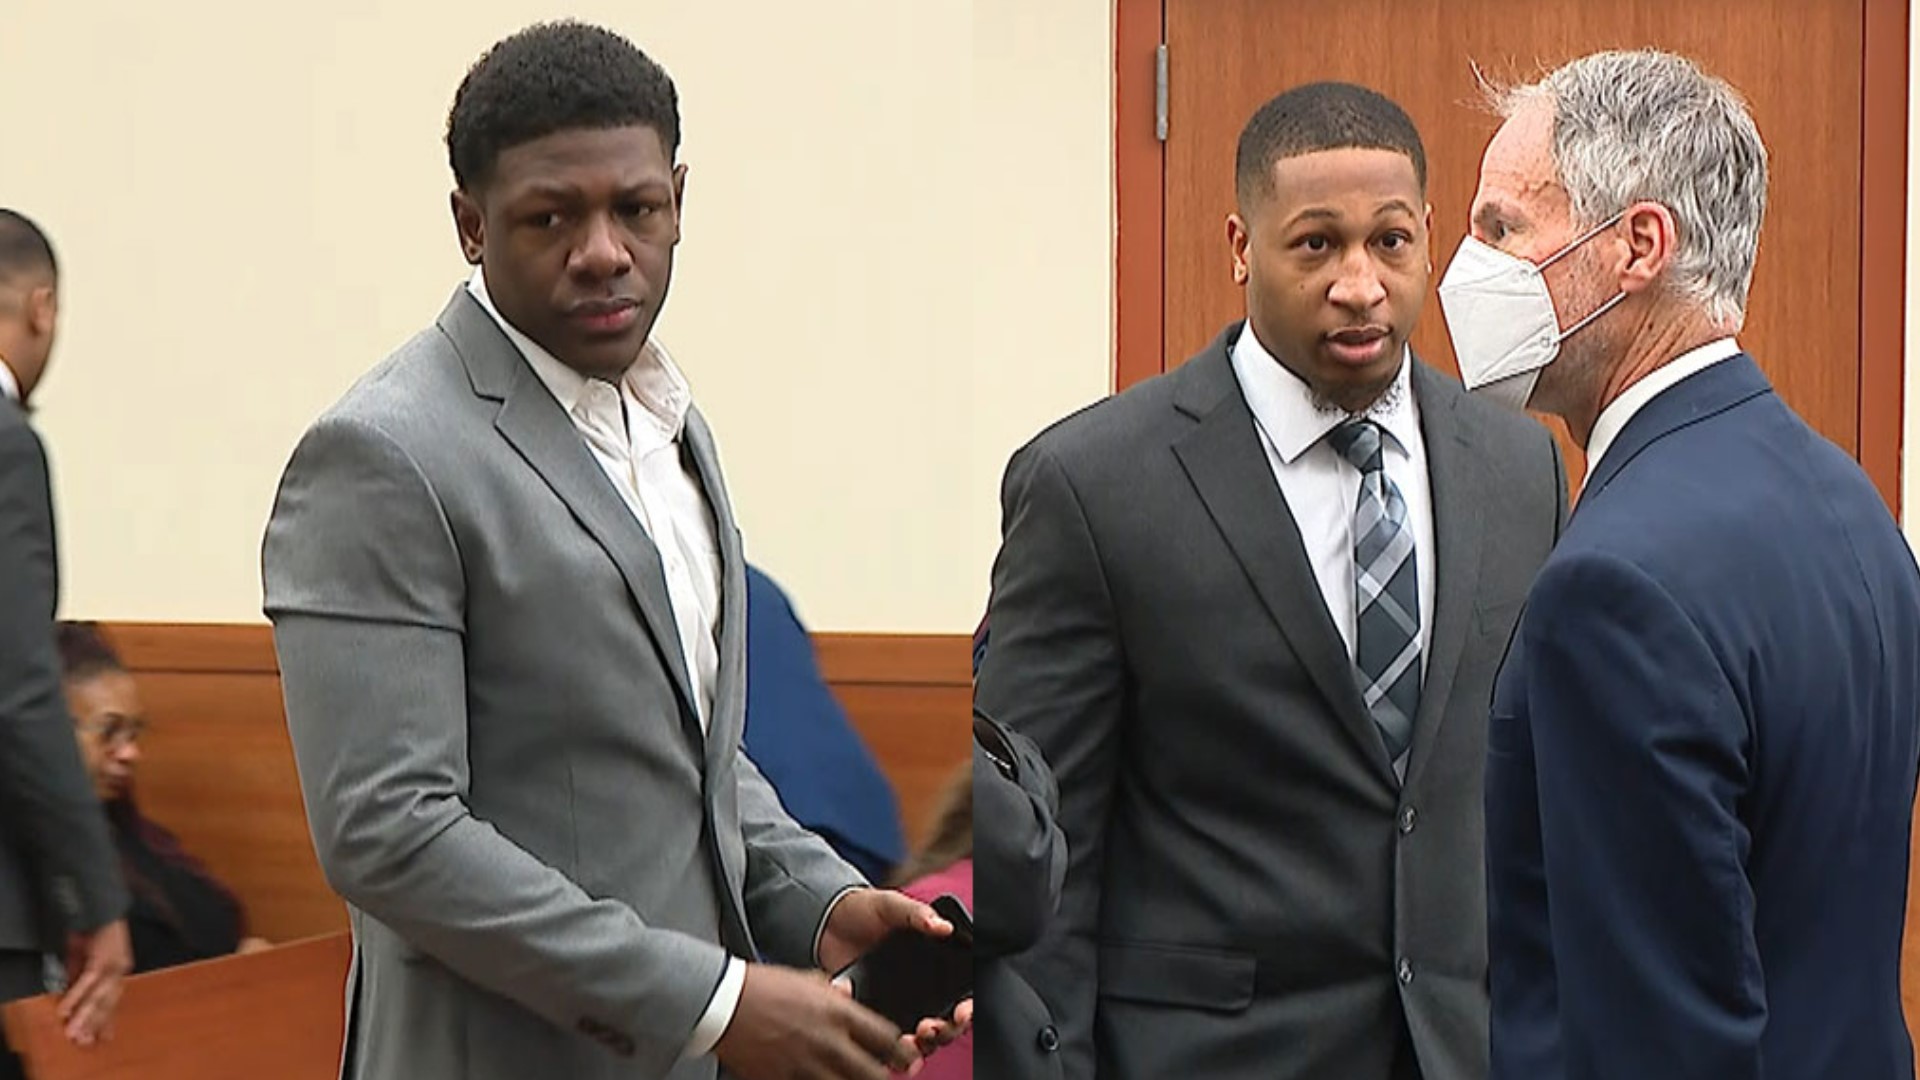 Former Ohio State Football players, Amir Riep and Jahsen Wint, were found not guilty of rape by a Franklin county jury.